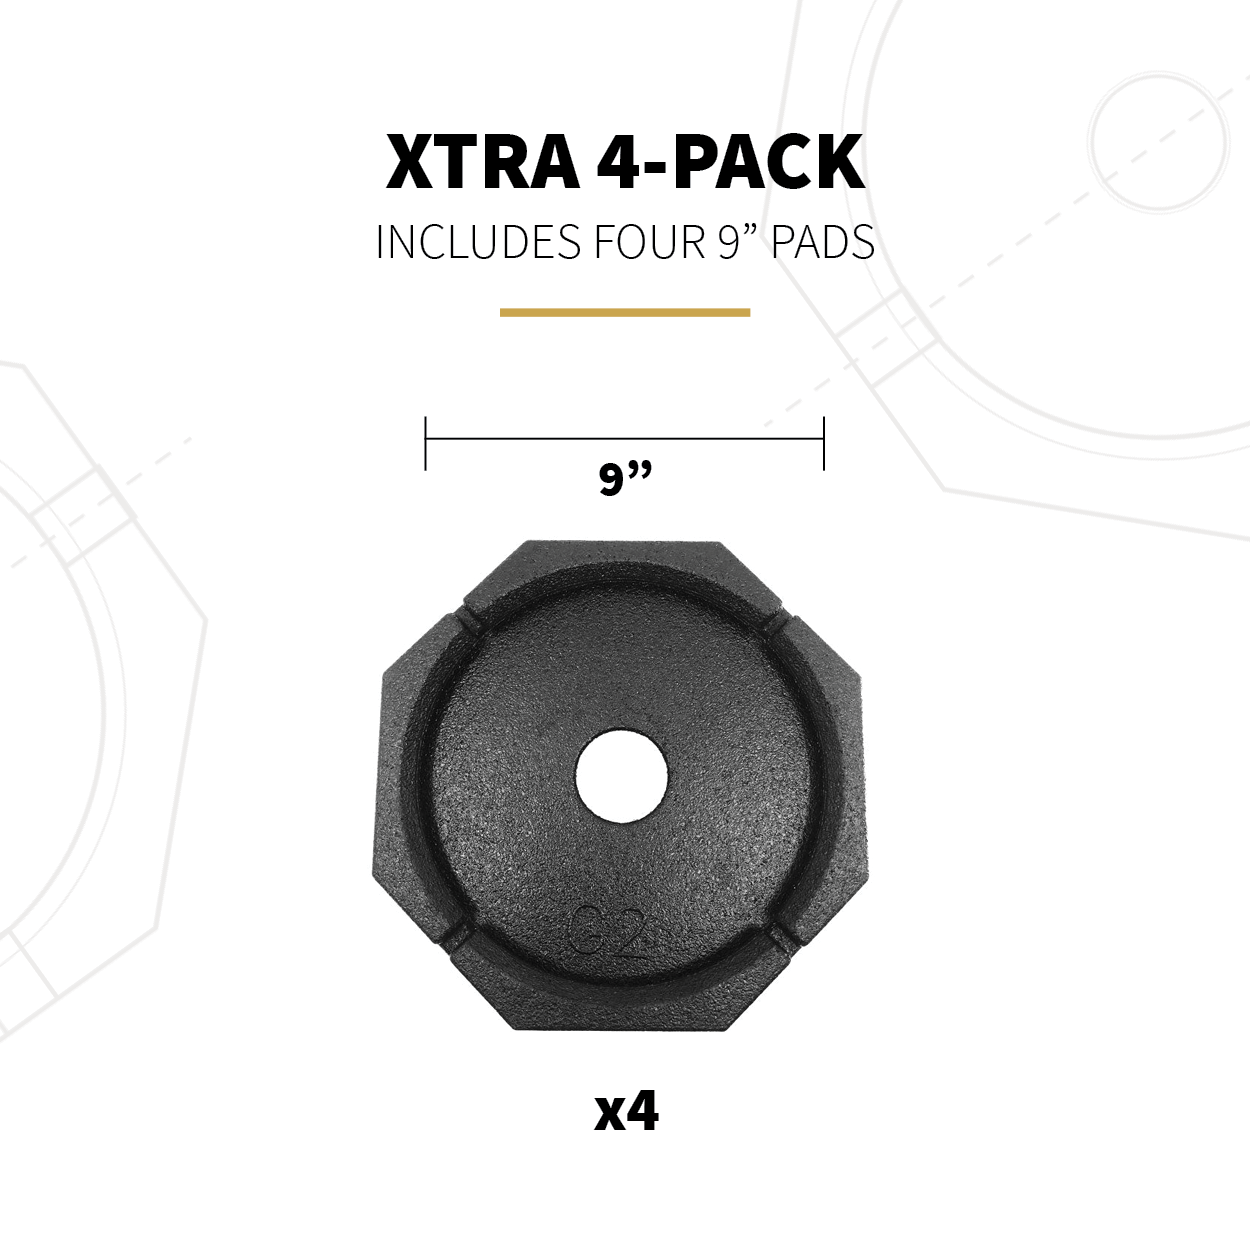 XTRA 4-Pack Specs